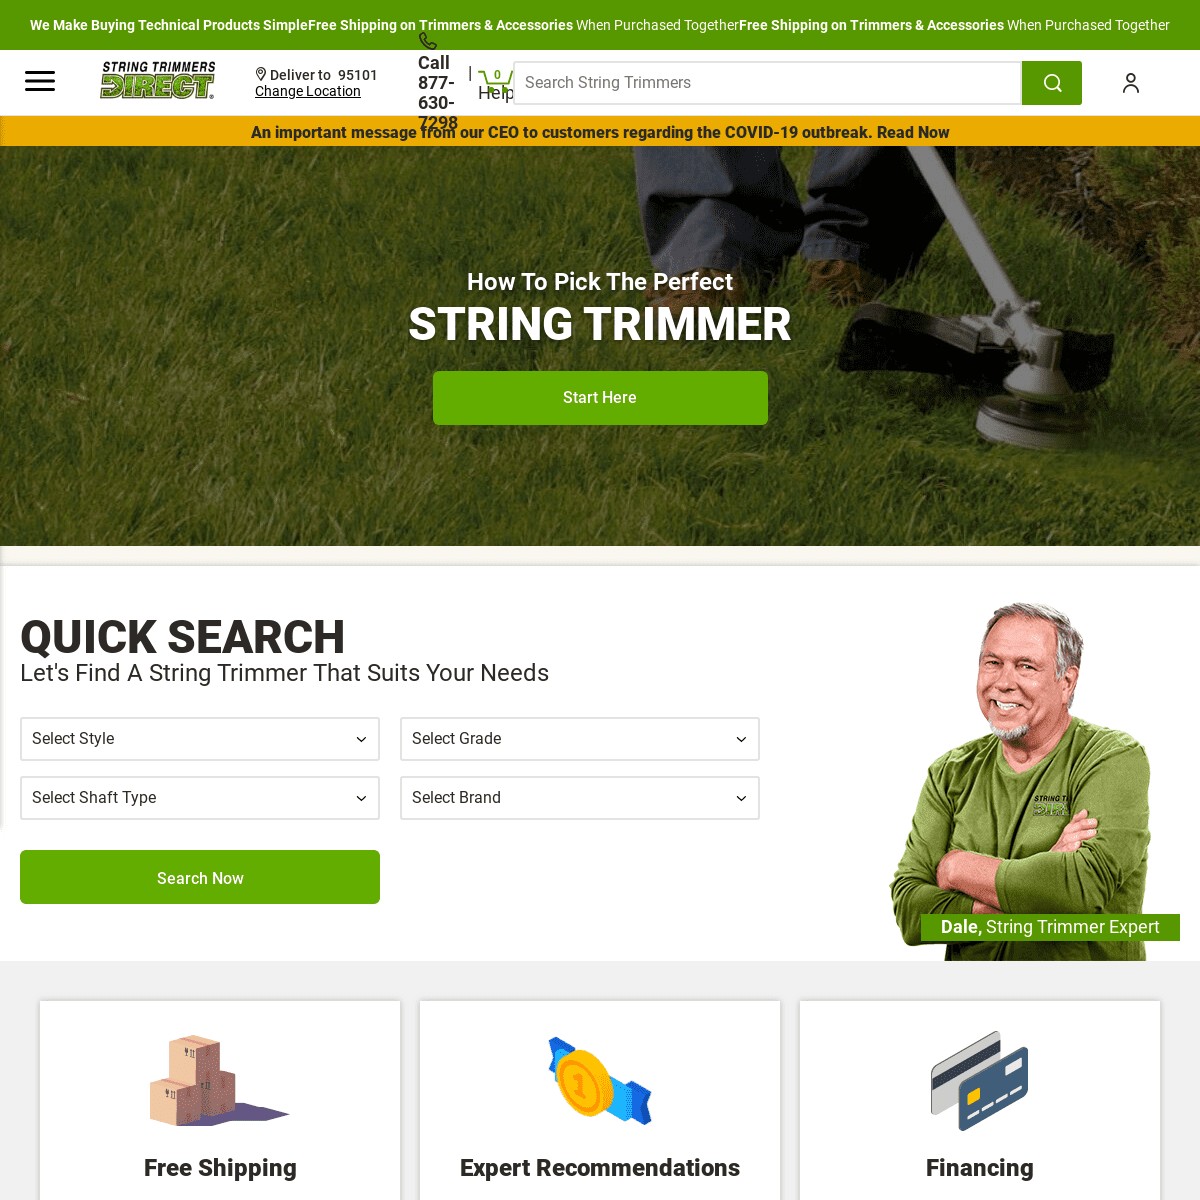 A complete backup of stringtrimmersdirect.com